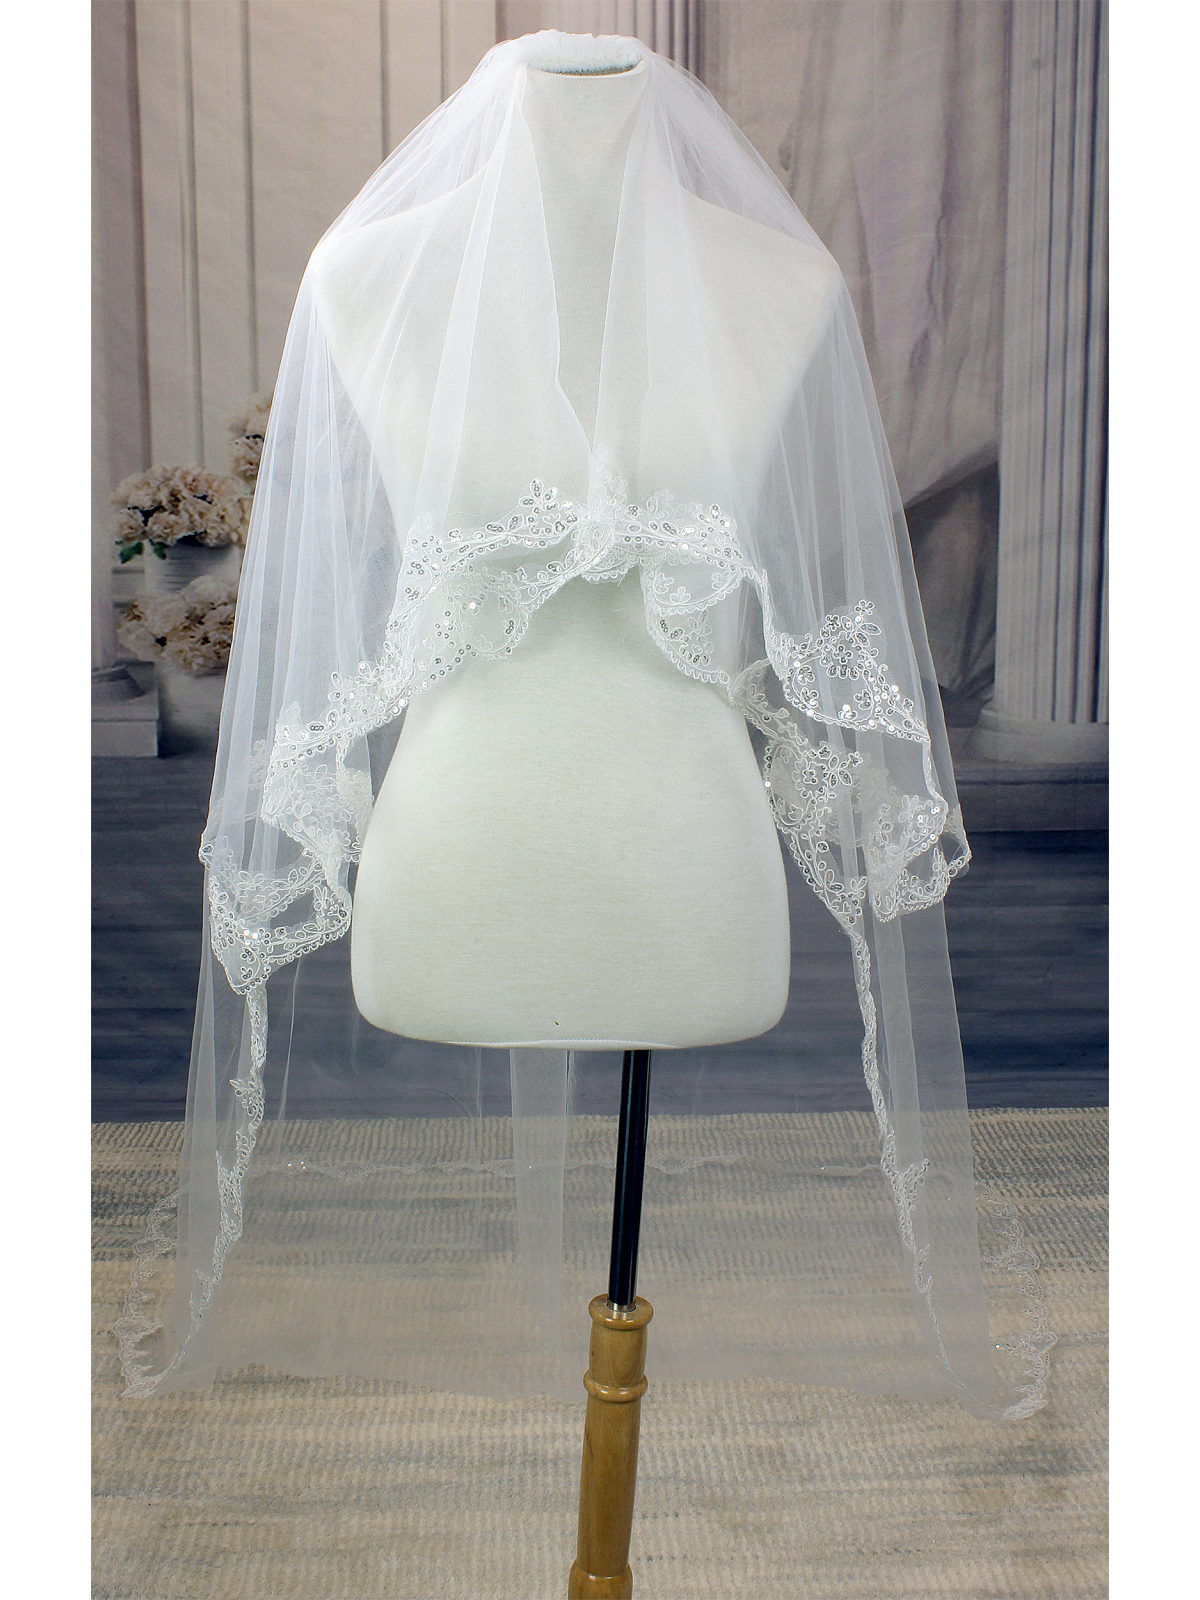 Long Veil - 2 layer with sequin & pearl embellished lace - 110" - VL-V1058-110IV